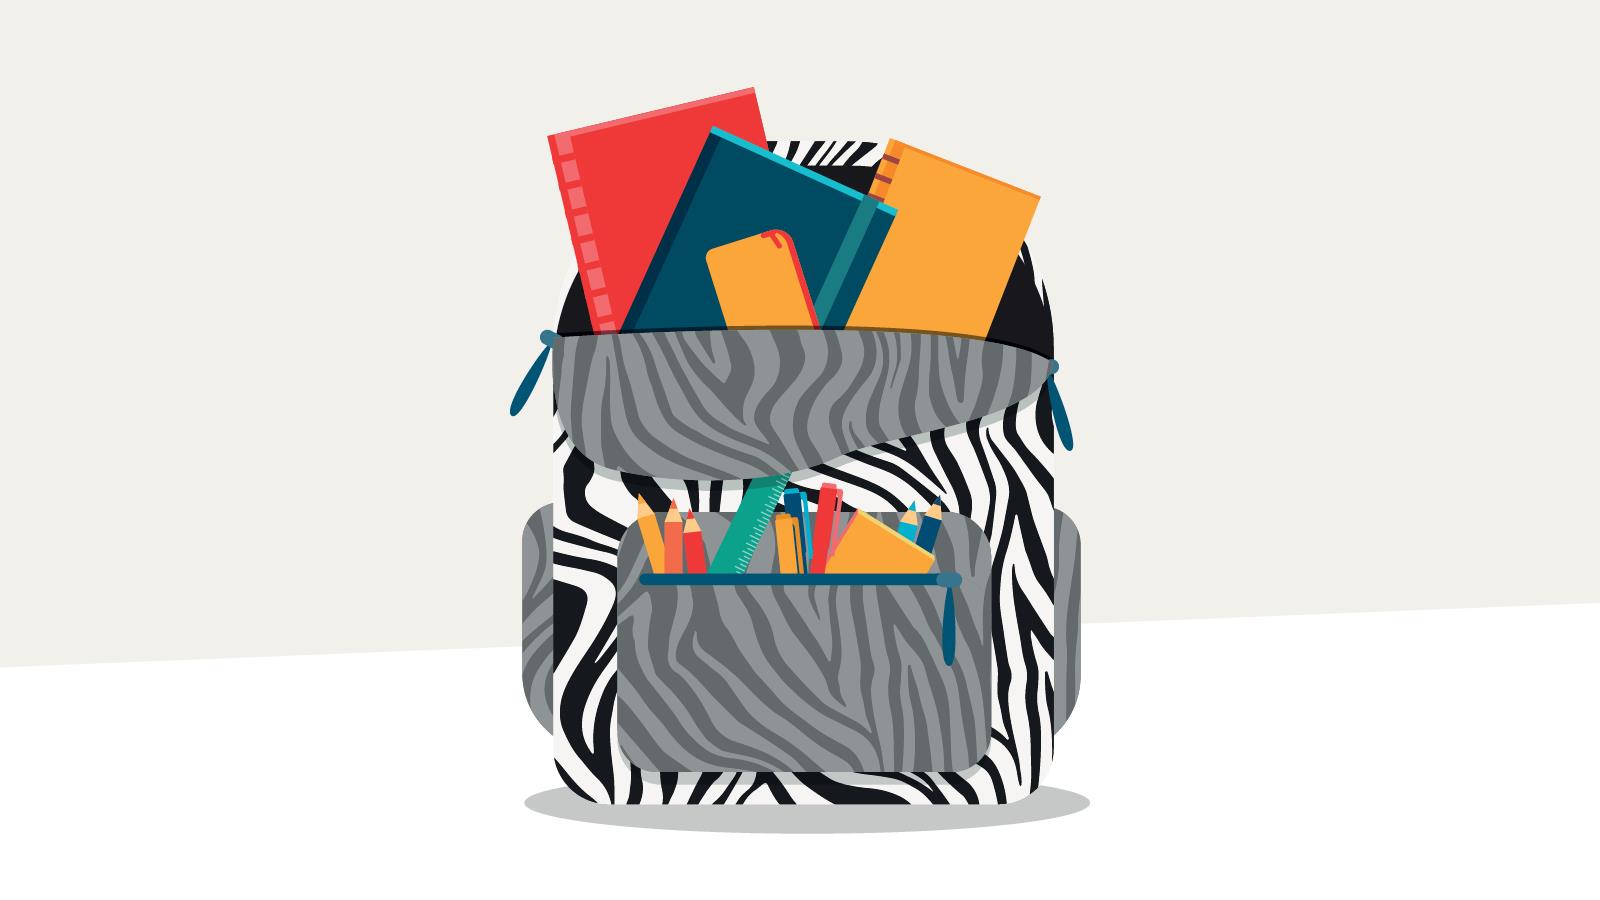 A zebra-patterned backpack stuffed with school supplies